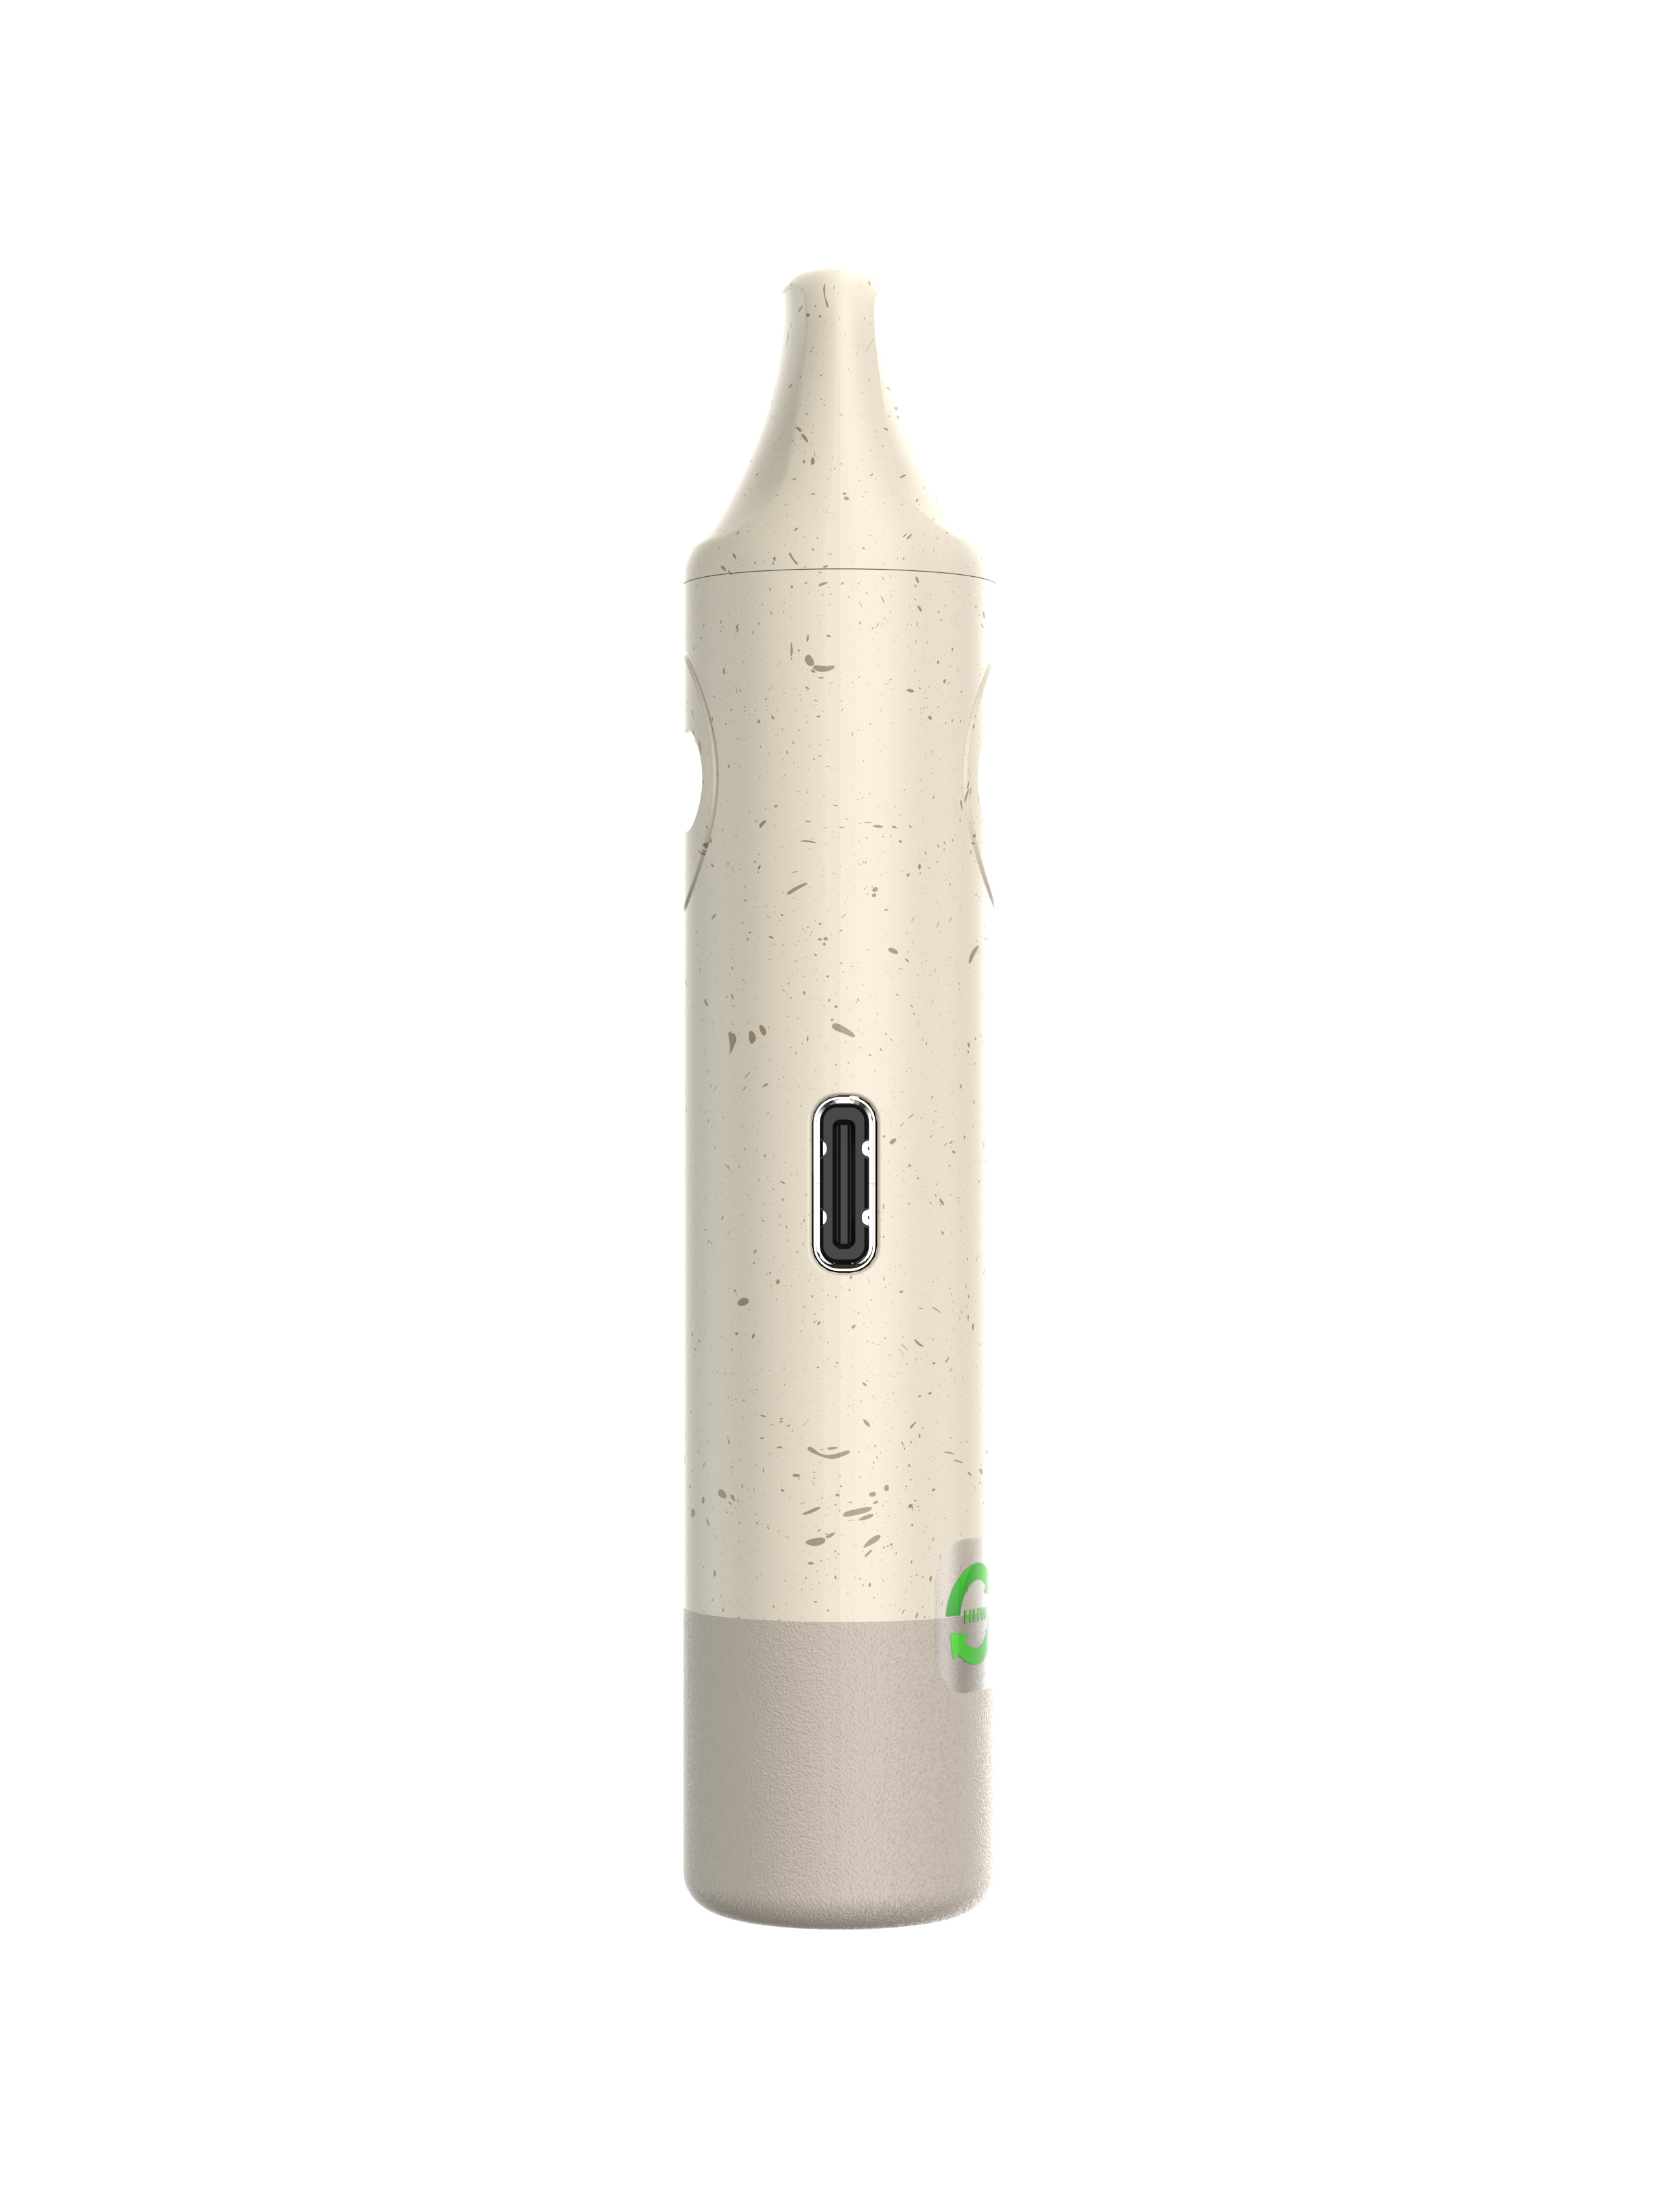 CCELL_DS6310-U Eco Star_P08